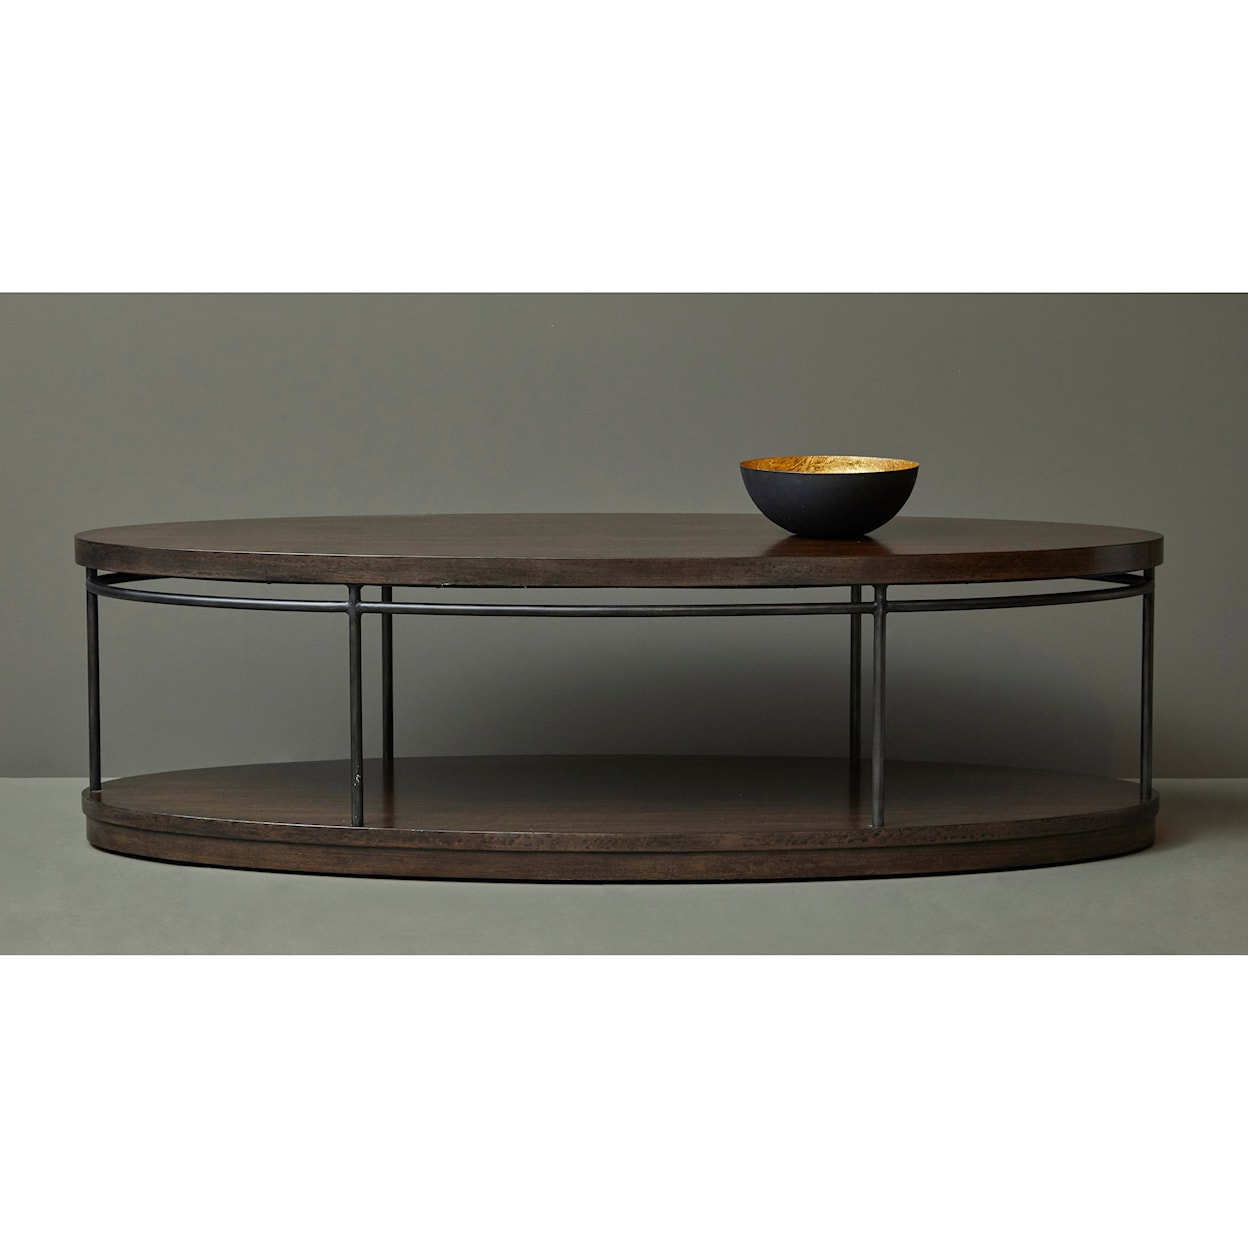 Pulaski Furniture Accents July 2021 Cocktail Table